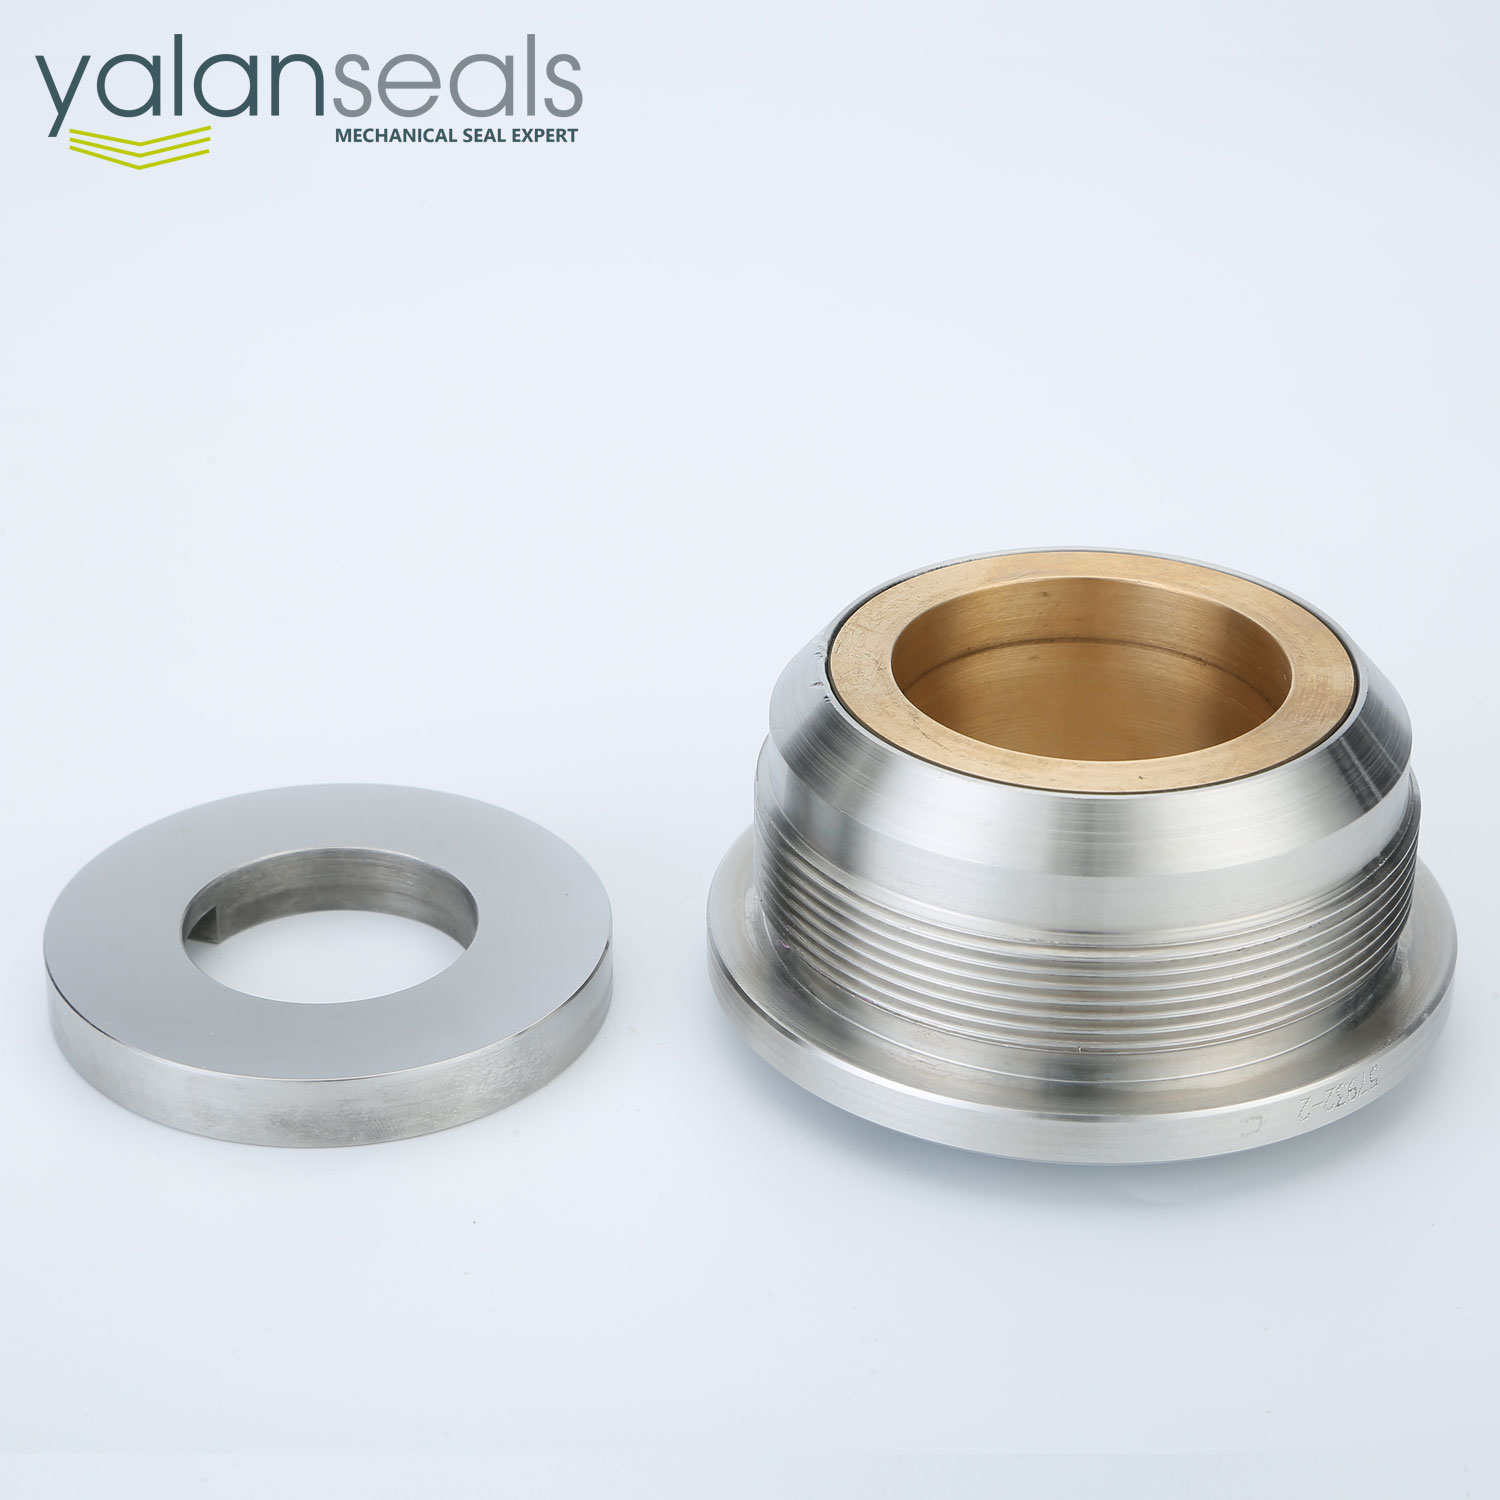 DWB1 Metal Bellow Mechanical Seal for Cryogenic Pumps